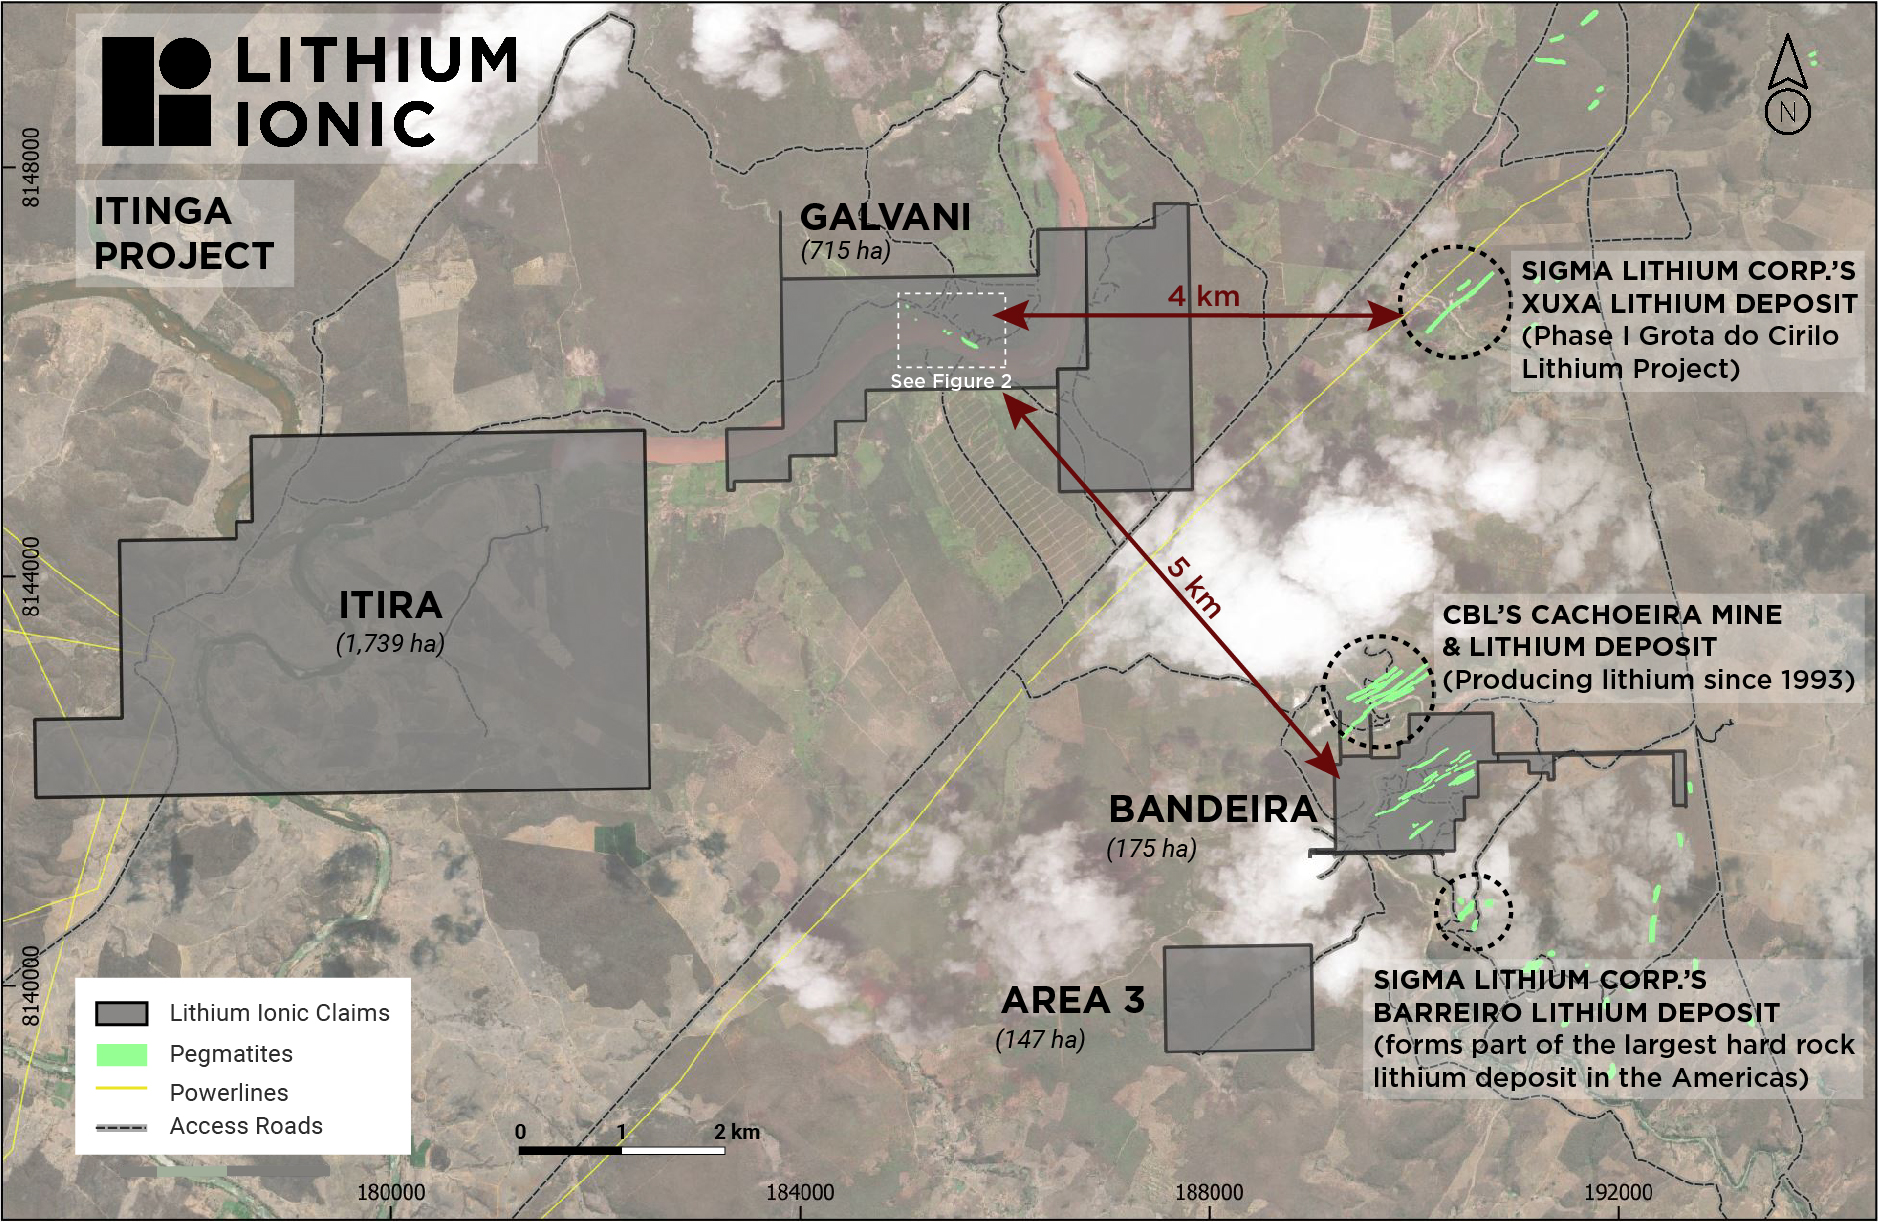 Figure 1: Galvani Property, Forming Part of the Itinga Project